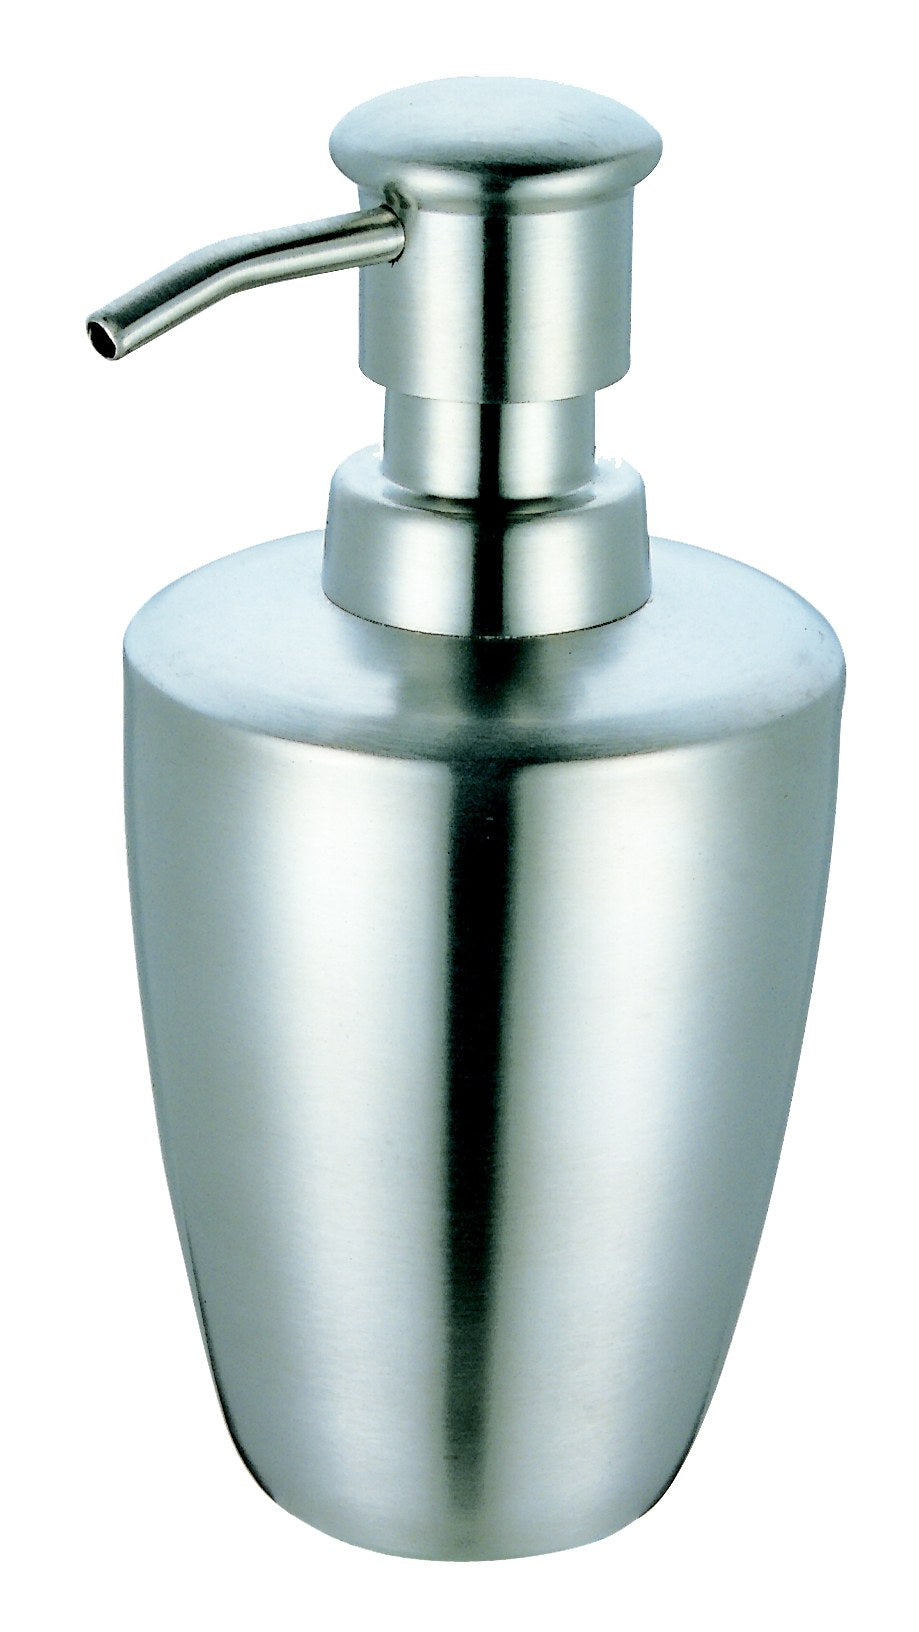 ITY Stainless Steel Soap Pump - 70050